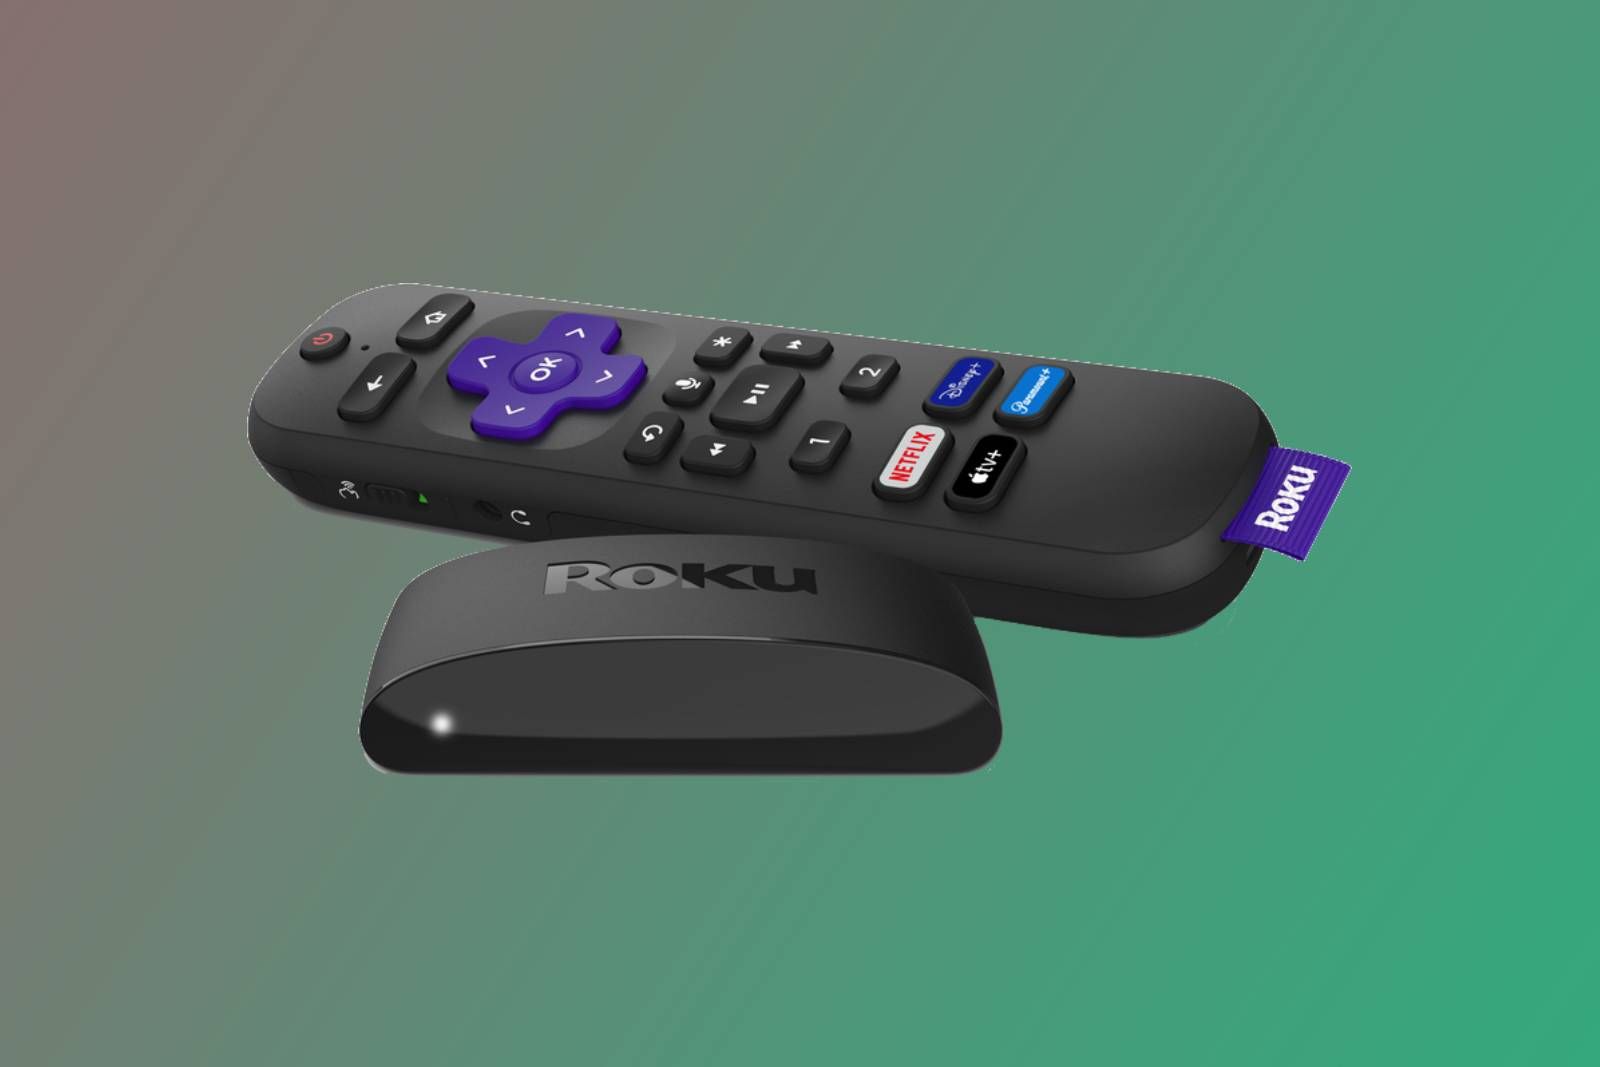 Roku's new bundle puts Roku Express 4K with a Voice Remote Pro for $50